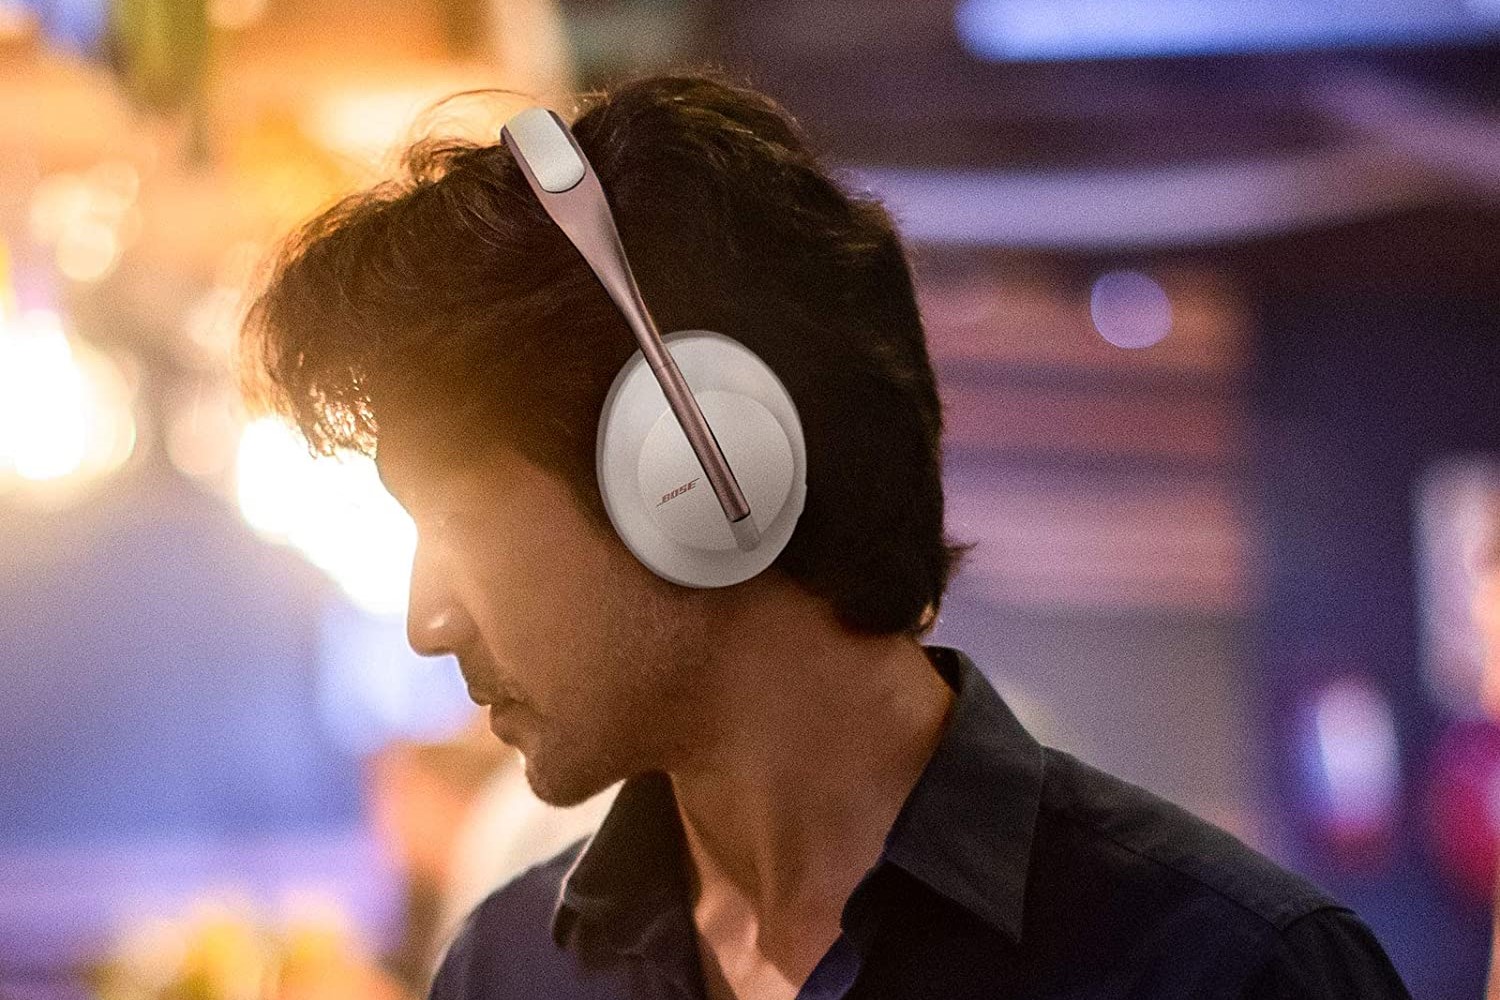 Bose's best noise-canceling headphones are discounted today